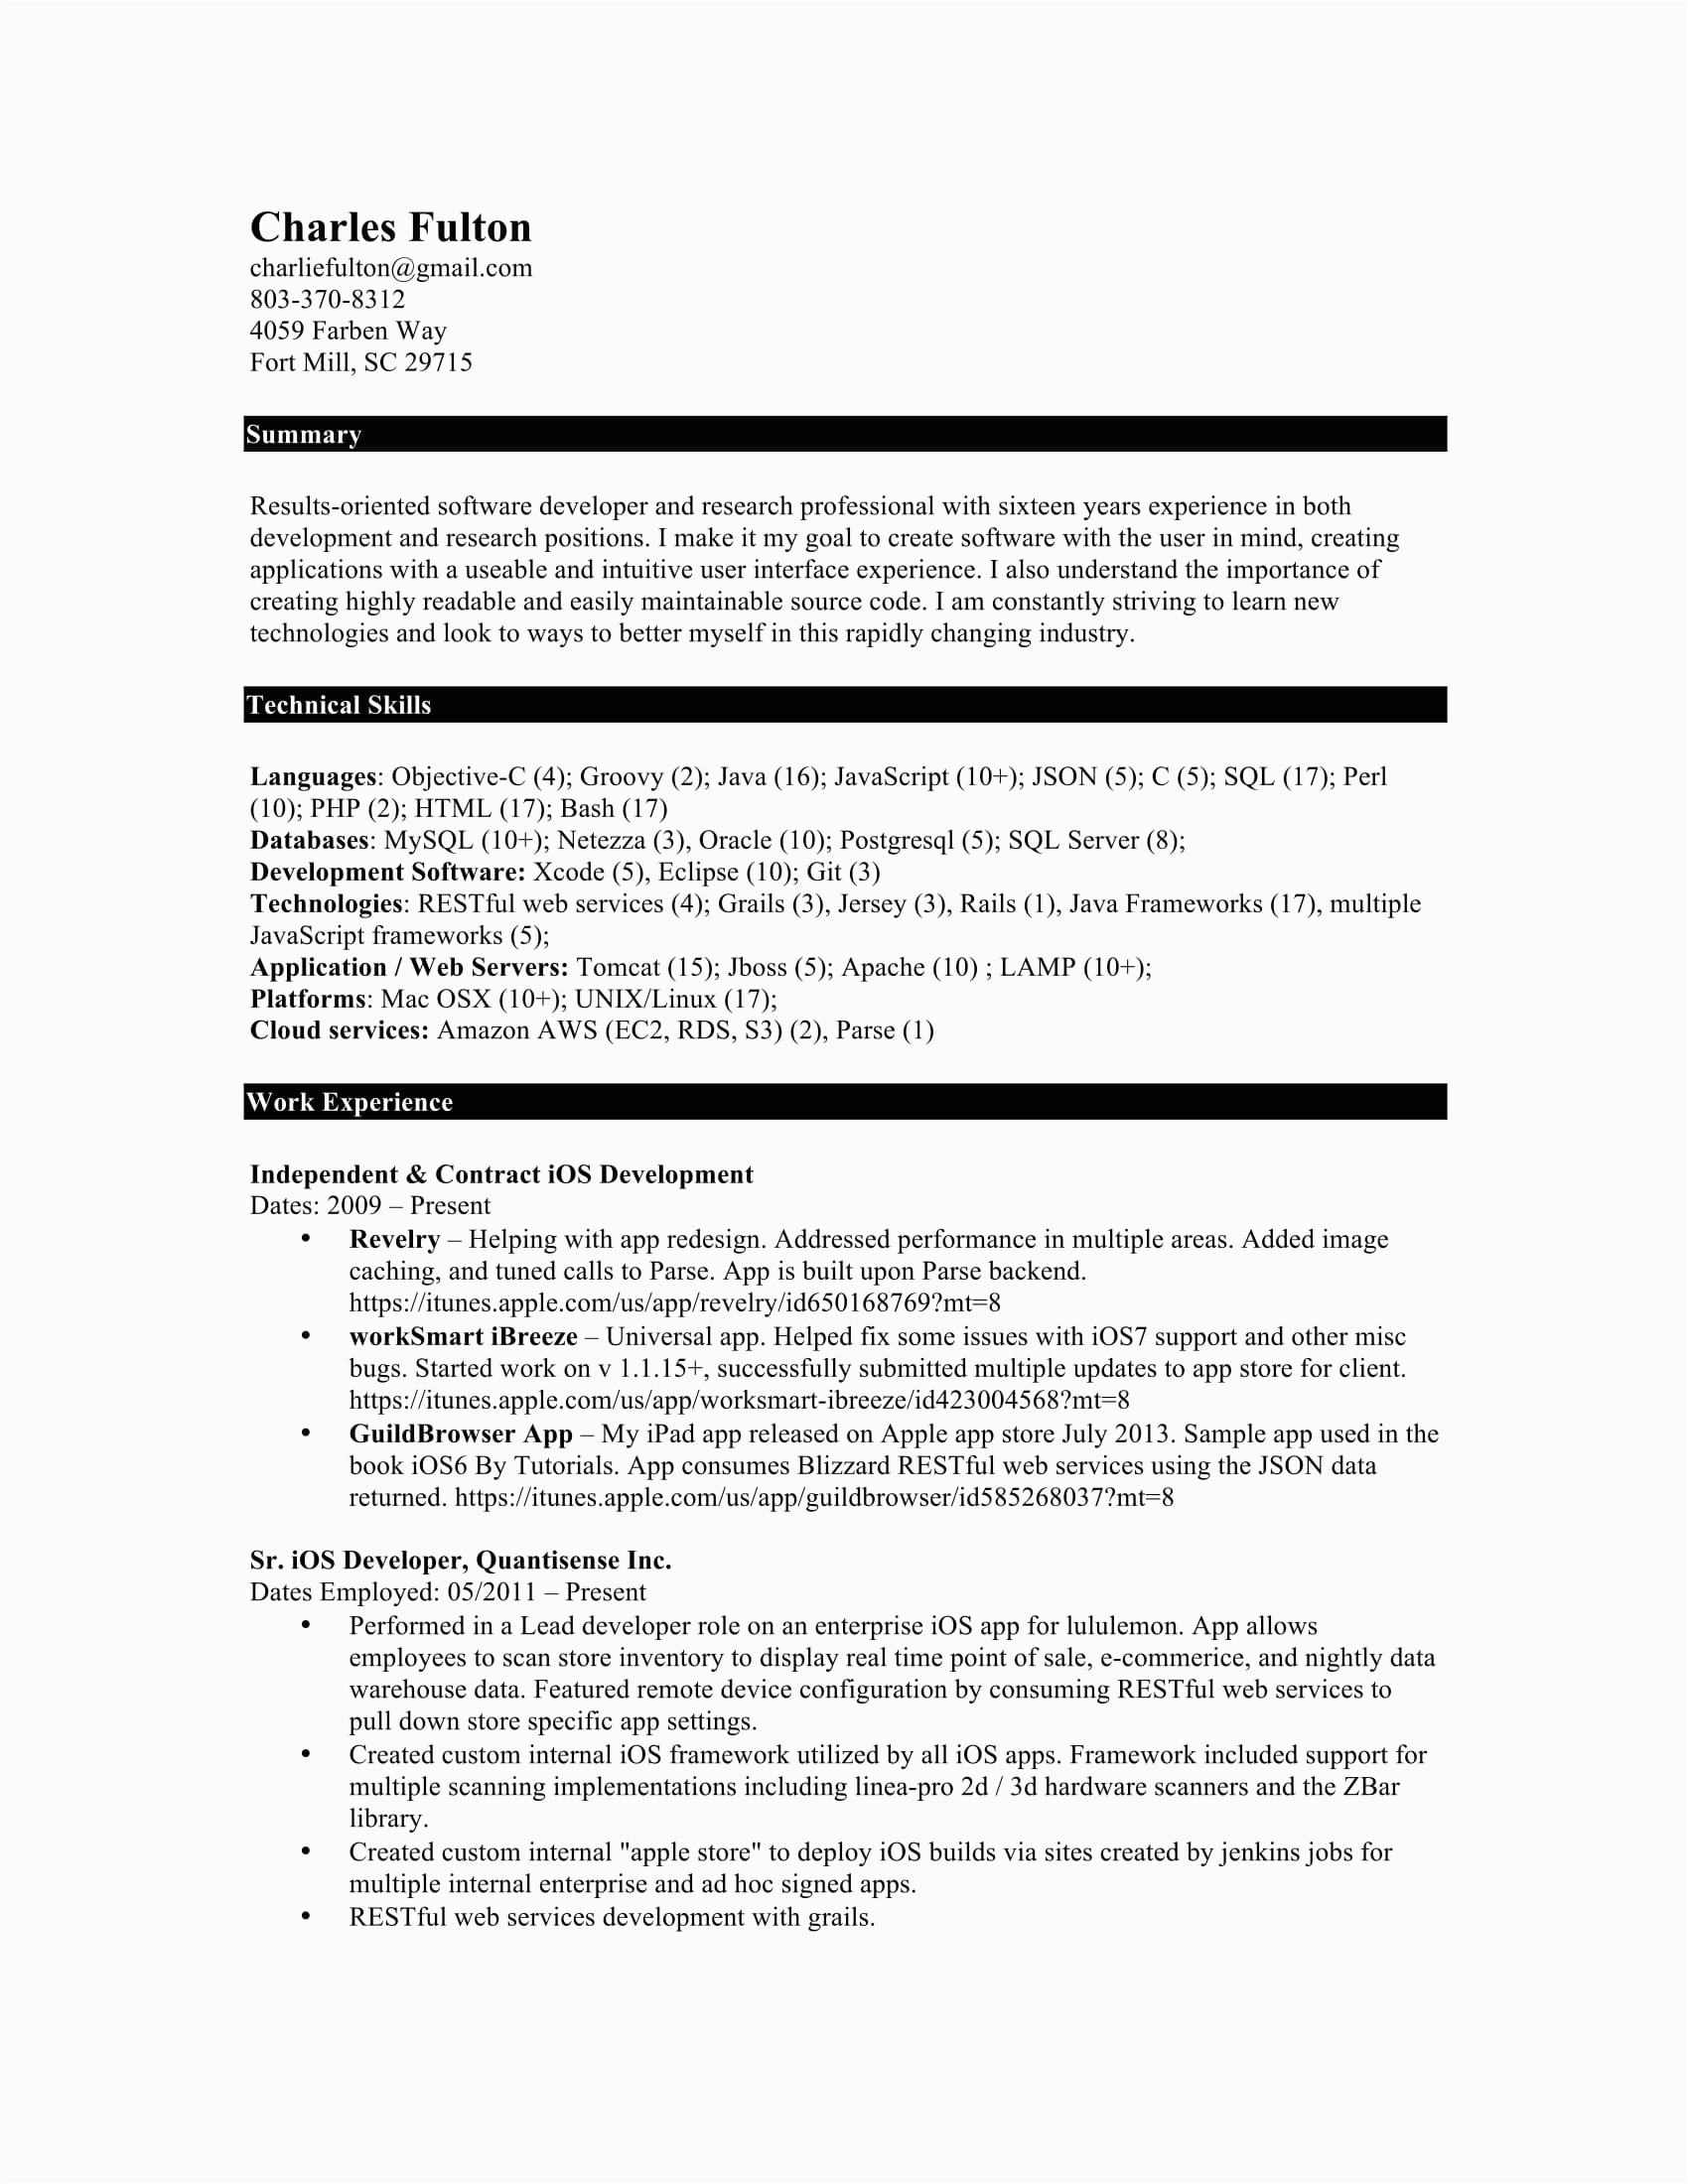 Sample Resume Of 2 Years Experience software Engineer 2 Year Experience Resume format for software Developer Doc